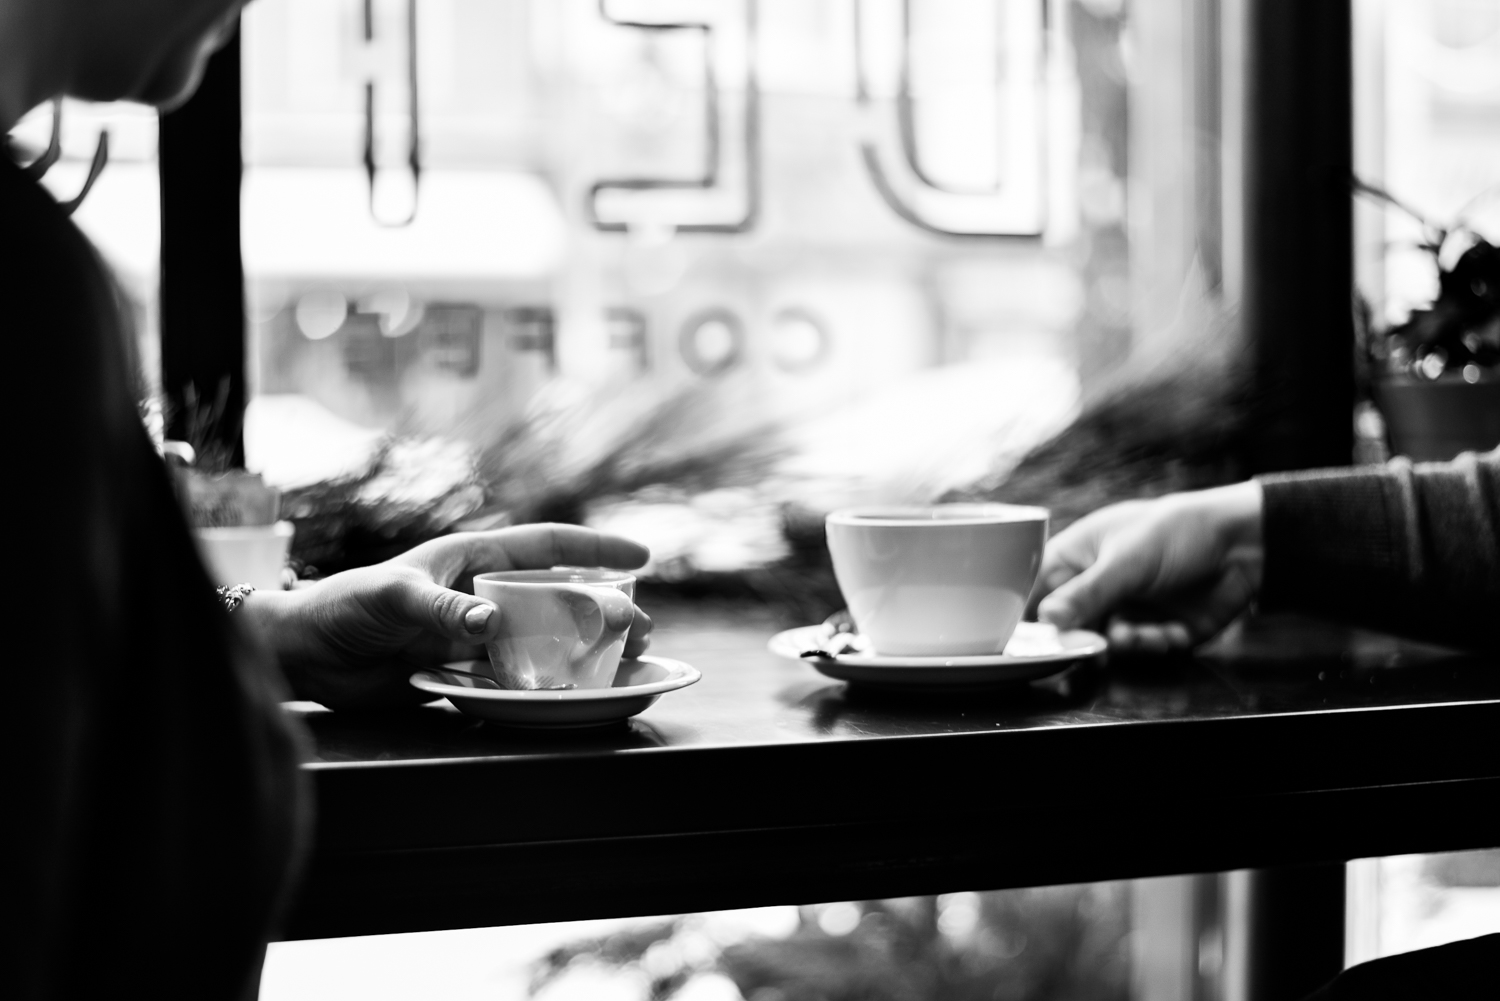 Black and white photo of coffee mugs and hands